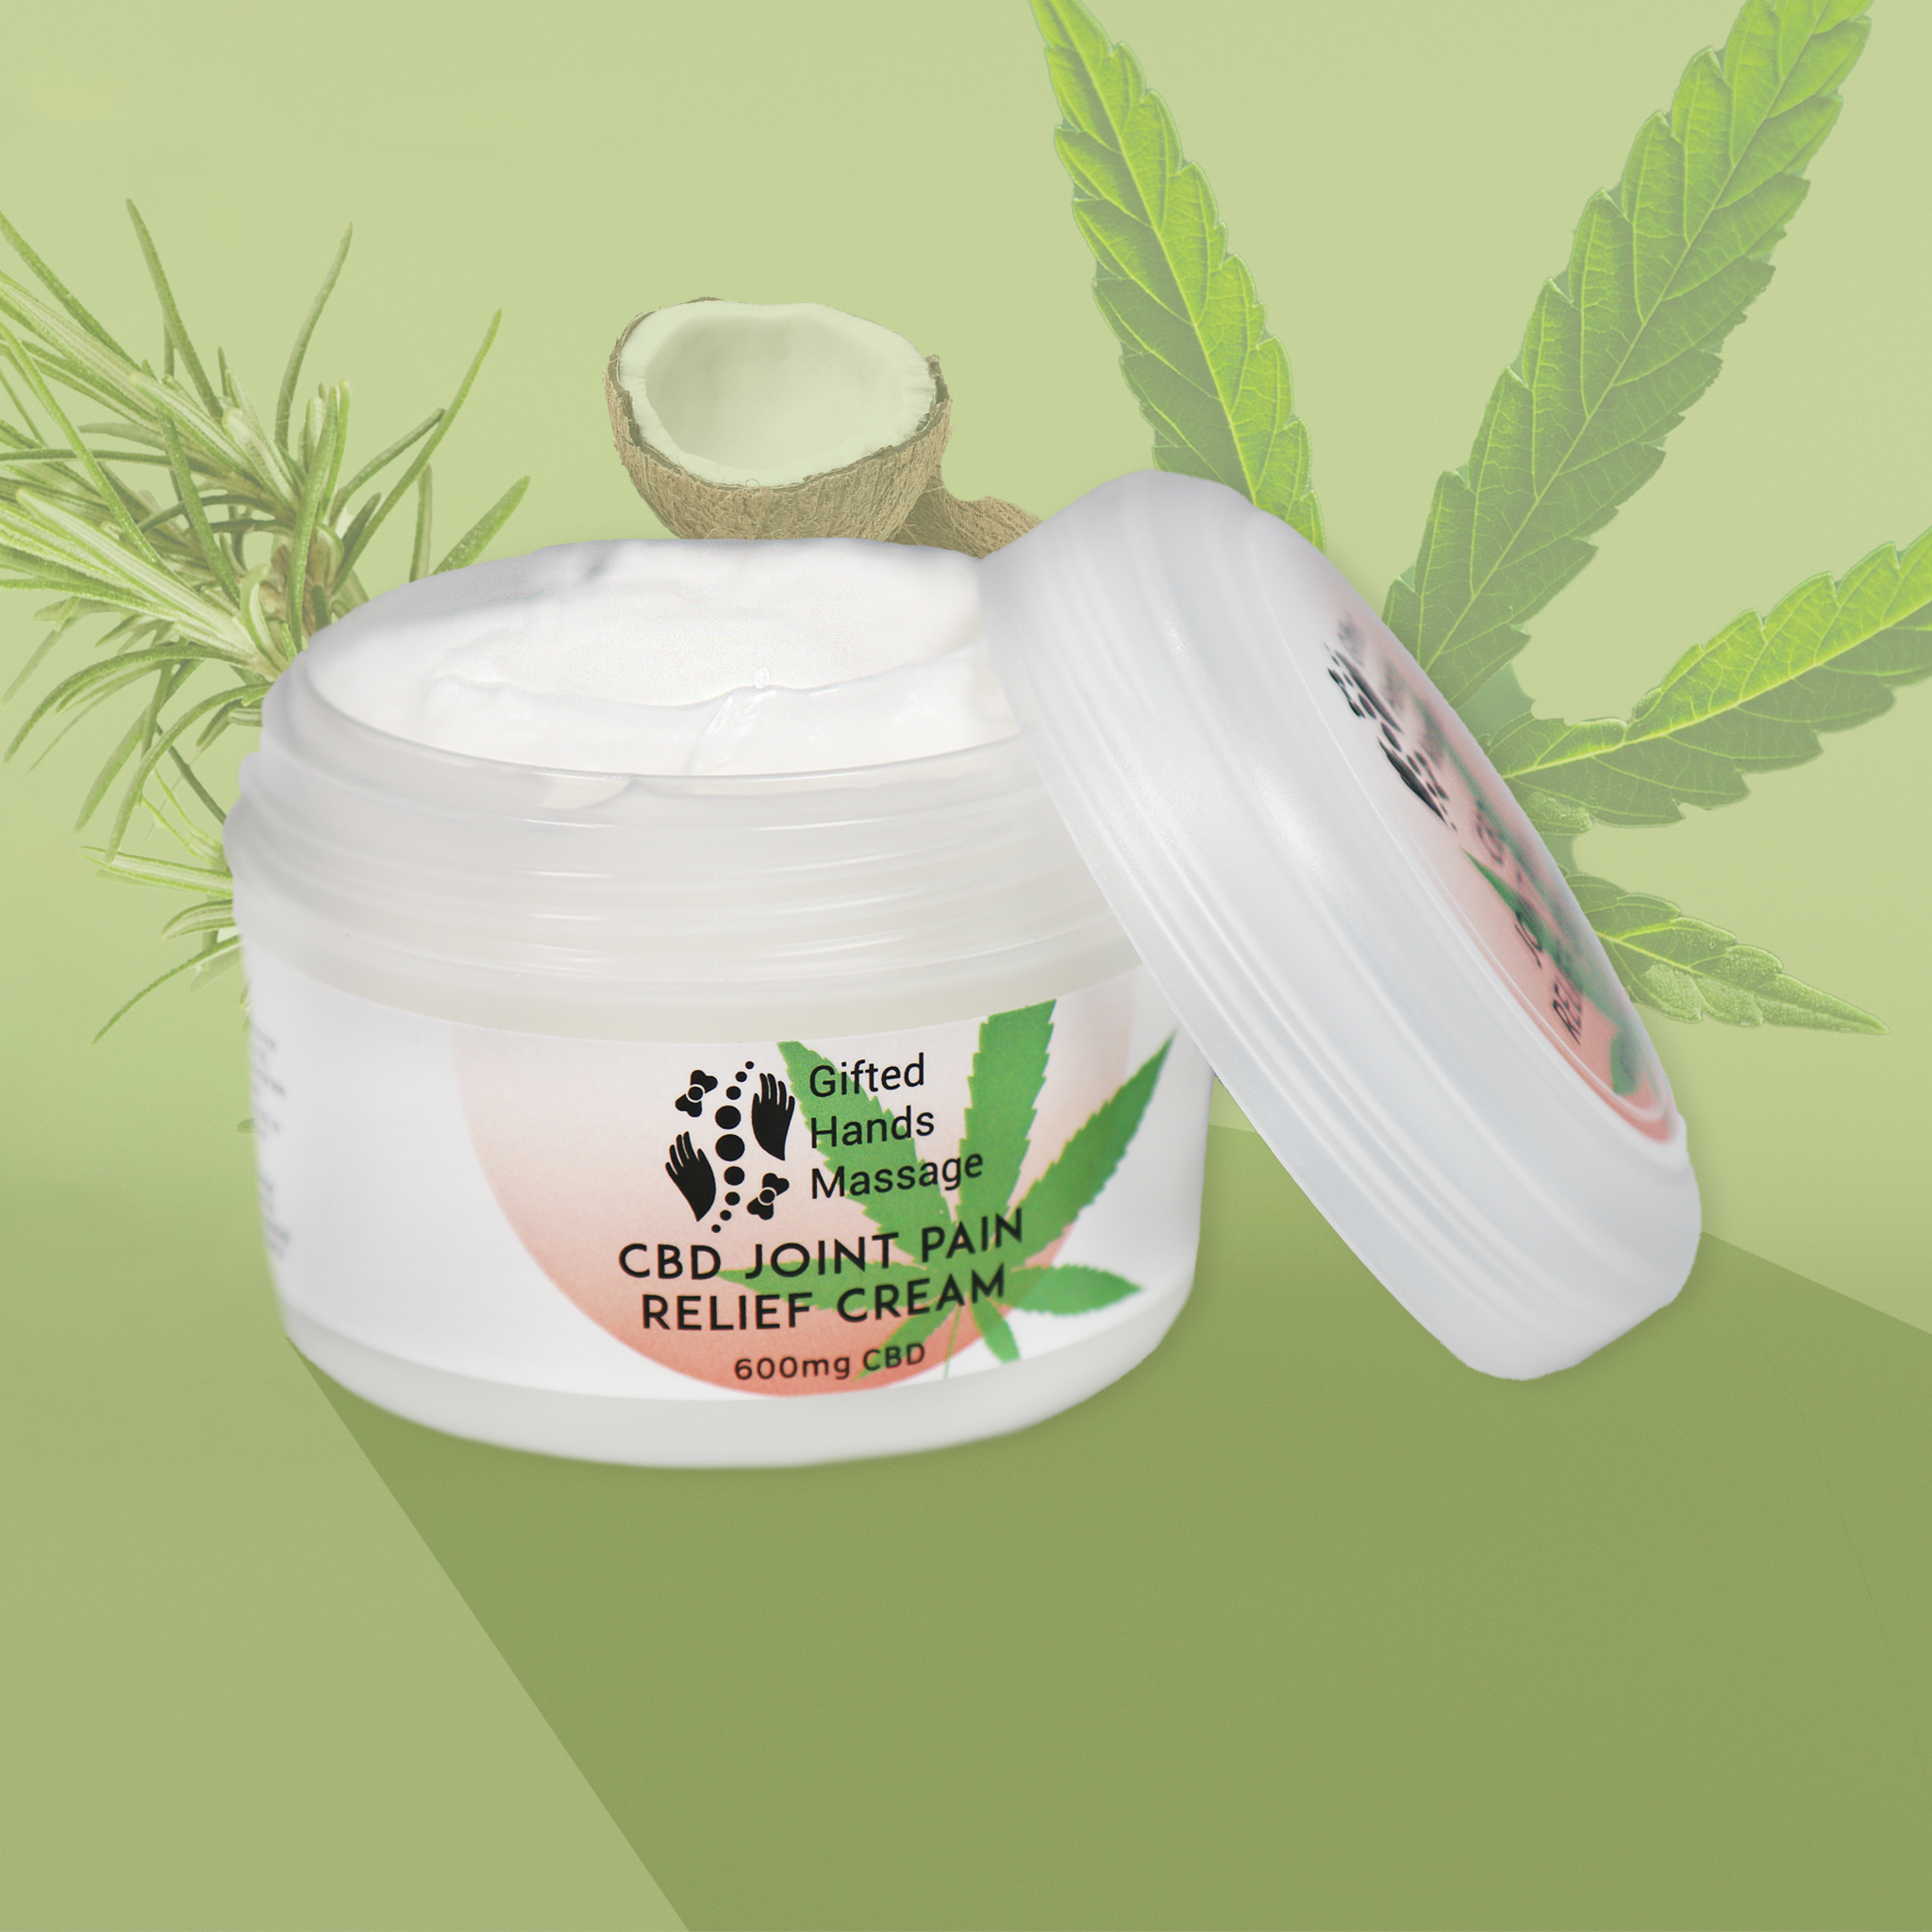 Gifted Hands CBD Joint Pain Relief Cream | 600mg